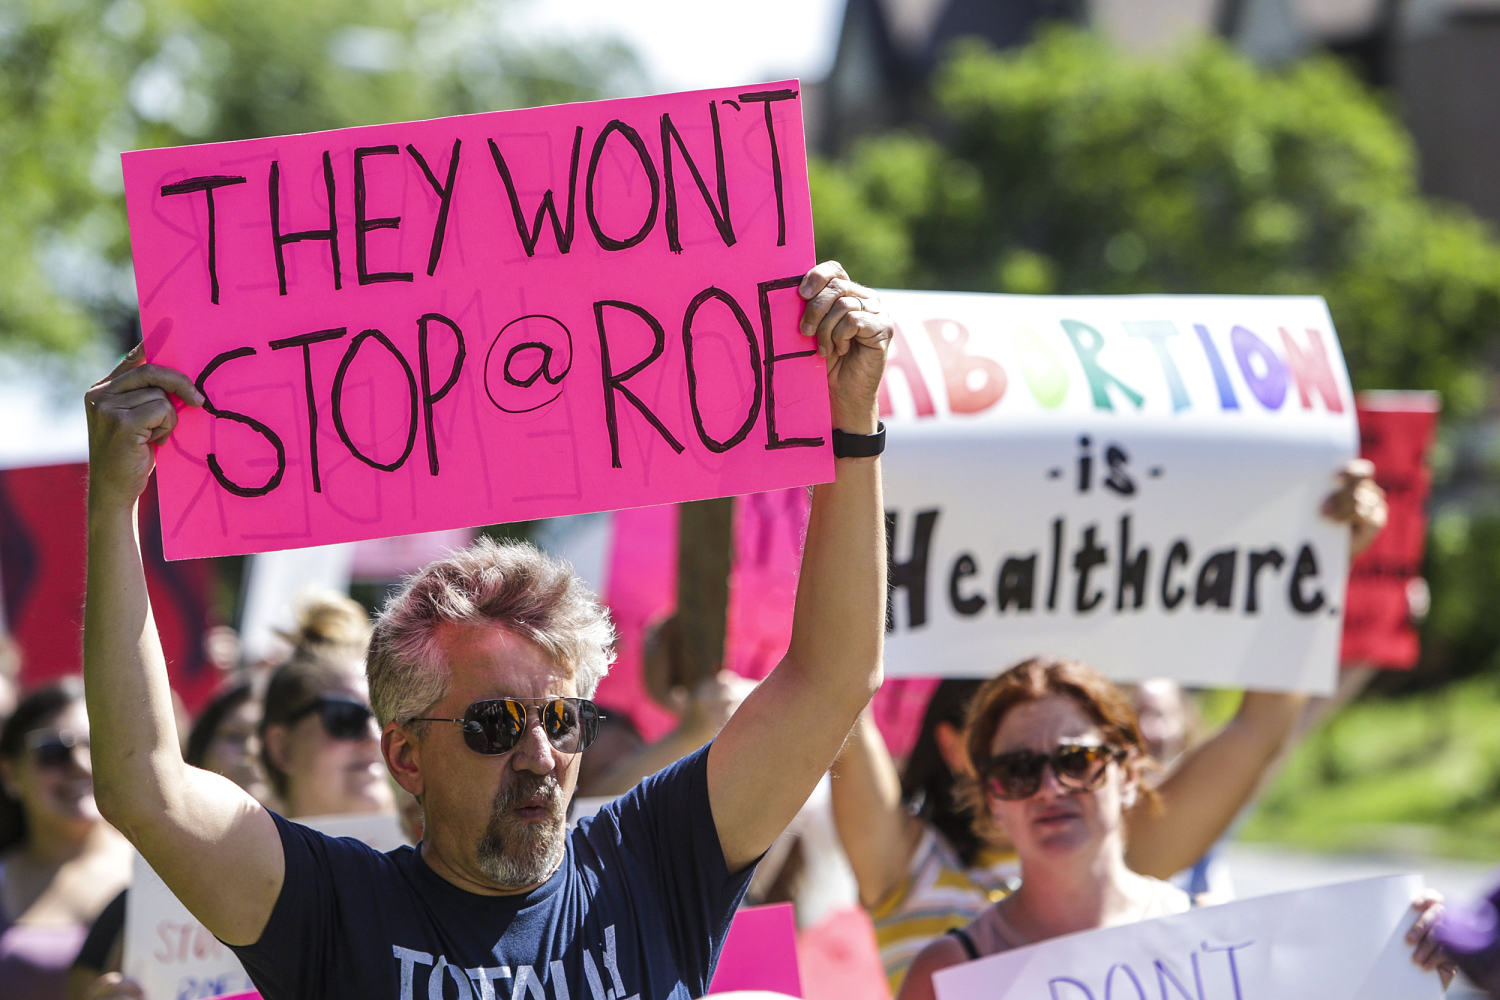 Iowa's ban on abortions after 6 weeks will go into effect next week